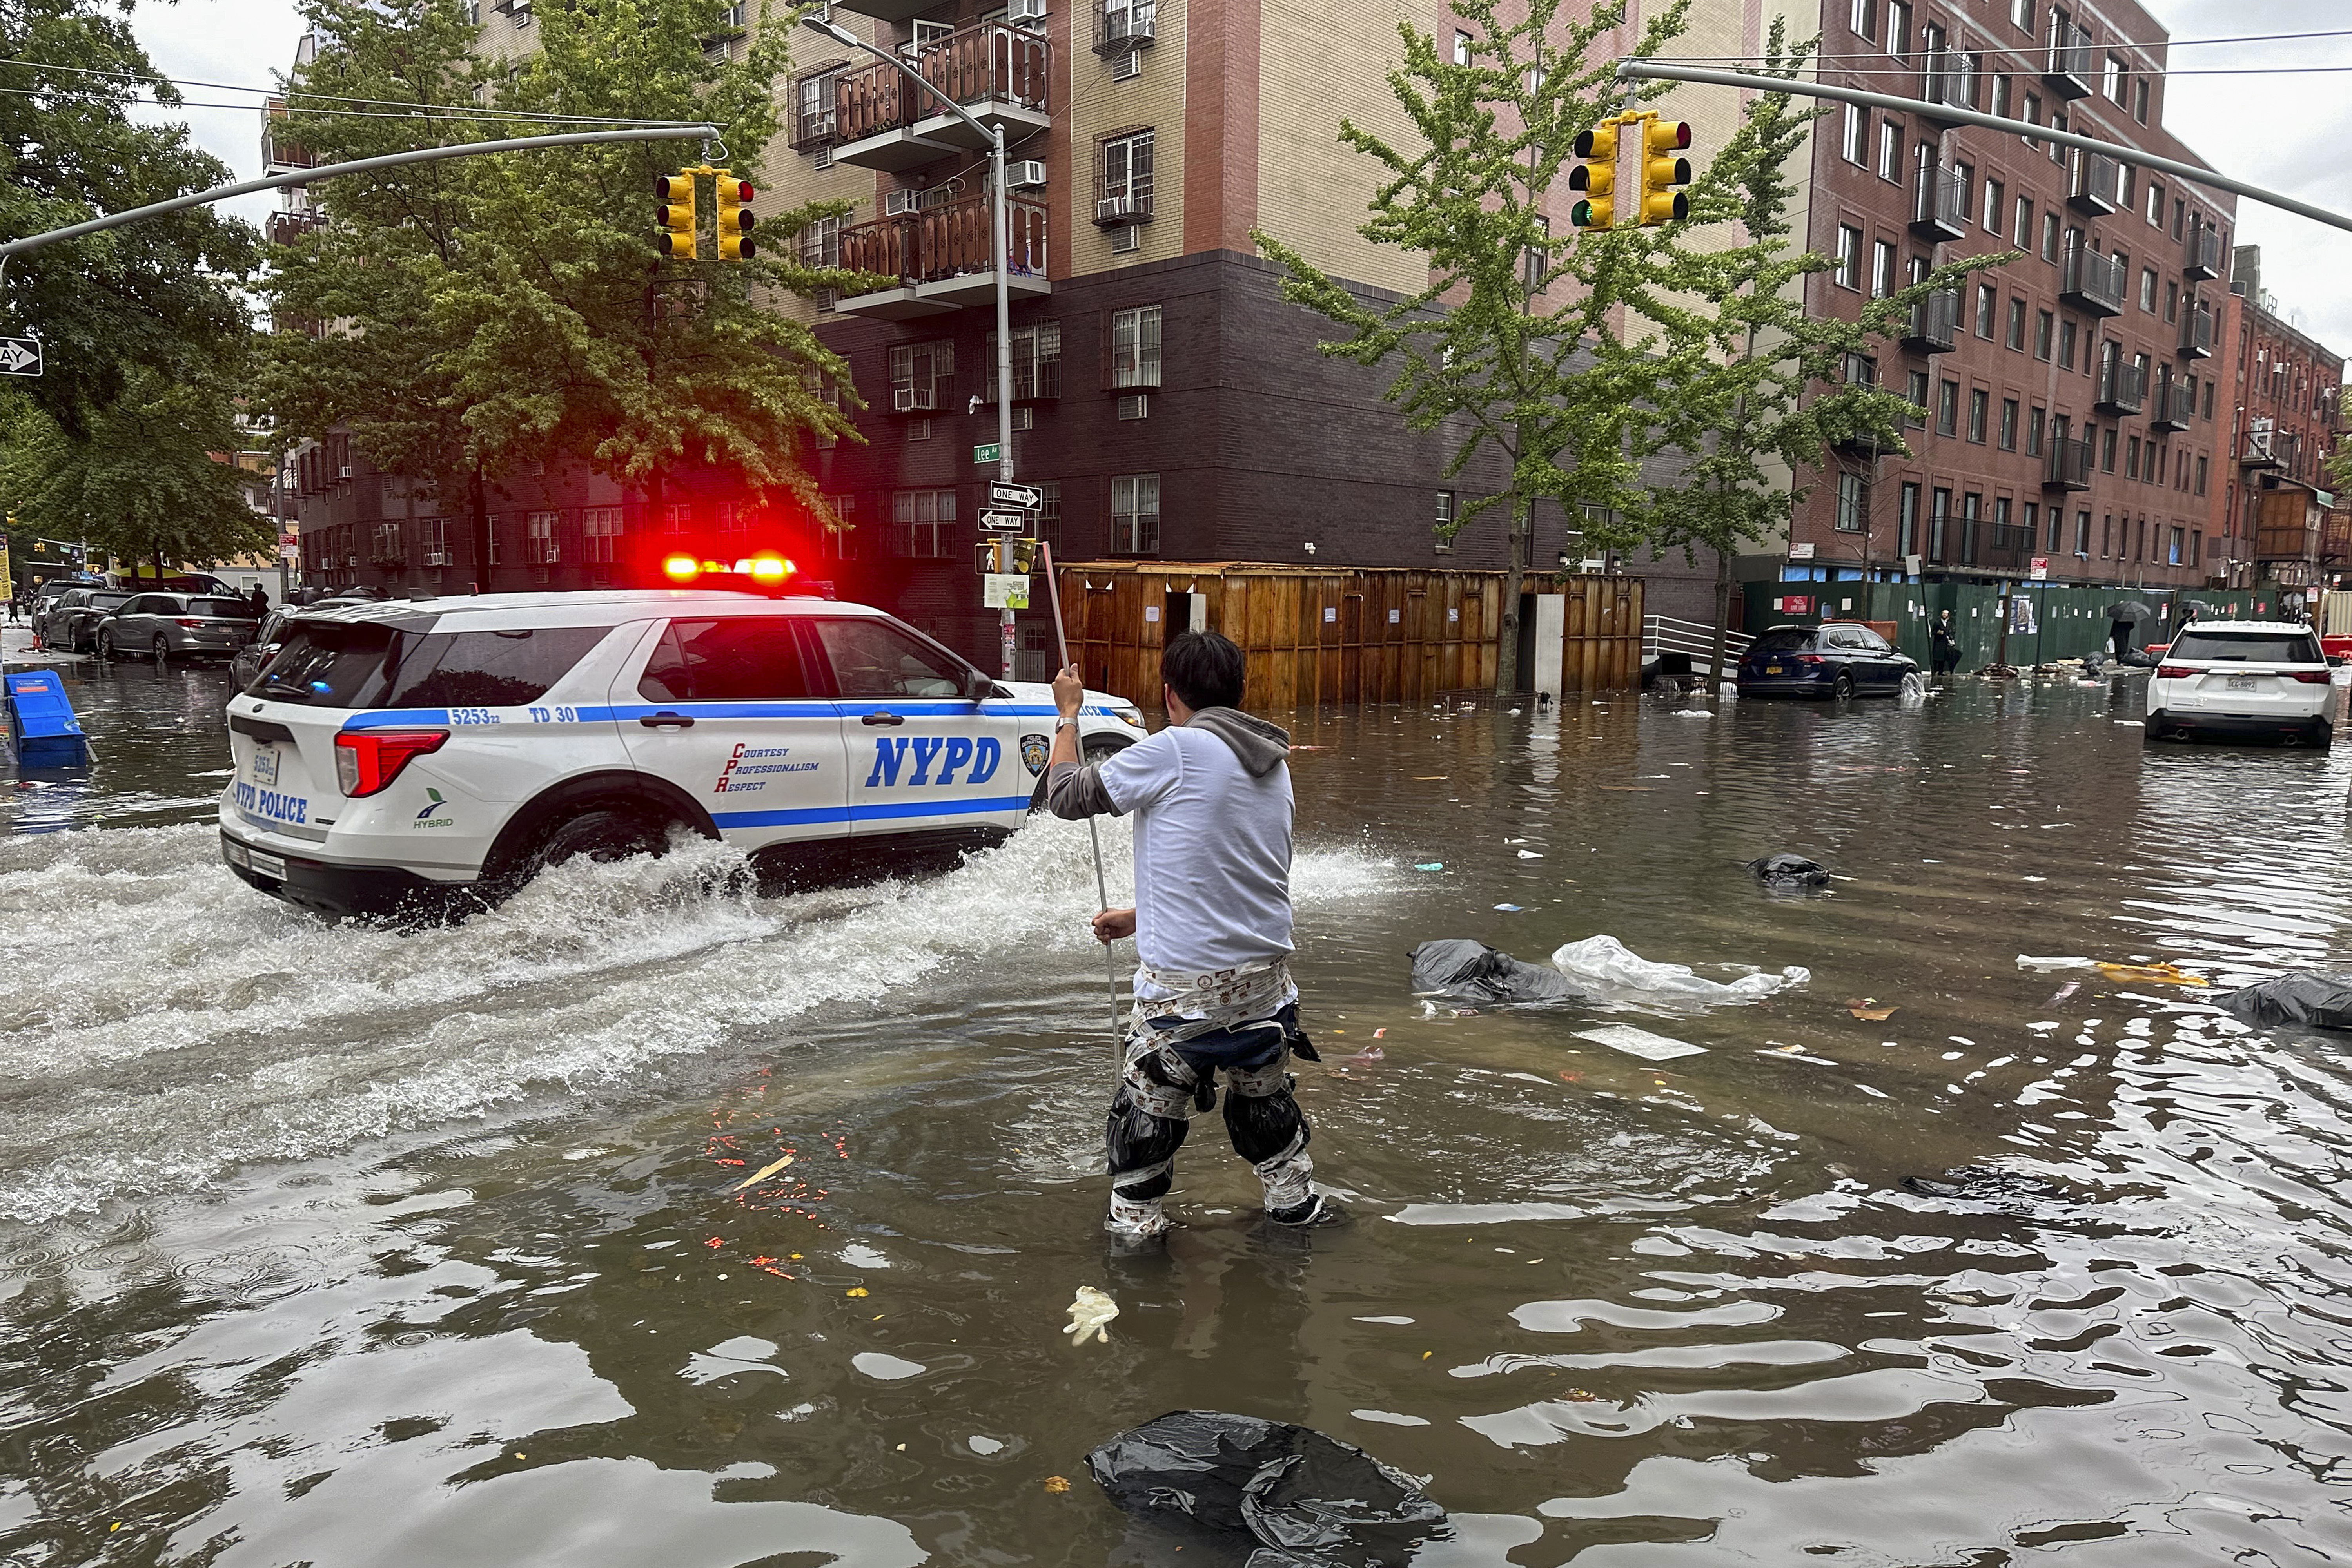 A man works to clear a drain in flood waters, Friday, Sept. 29, 2023, in the Brooklyn borough of New York. A potent rush-hour rainstorm has swamped the New York metropolitan area. The deluge Friday shut down swaths of the subway system, flooded some streets and highways, and cut off access to at least one terminal at LaGuardia Airport.